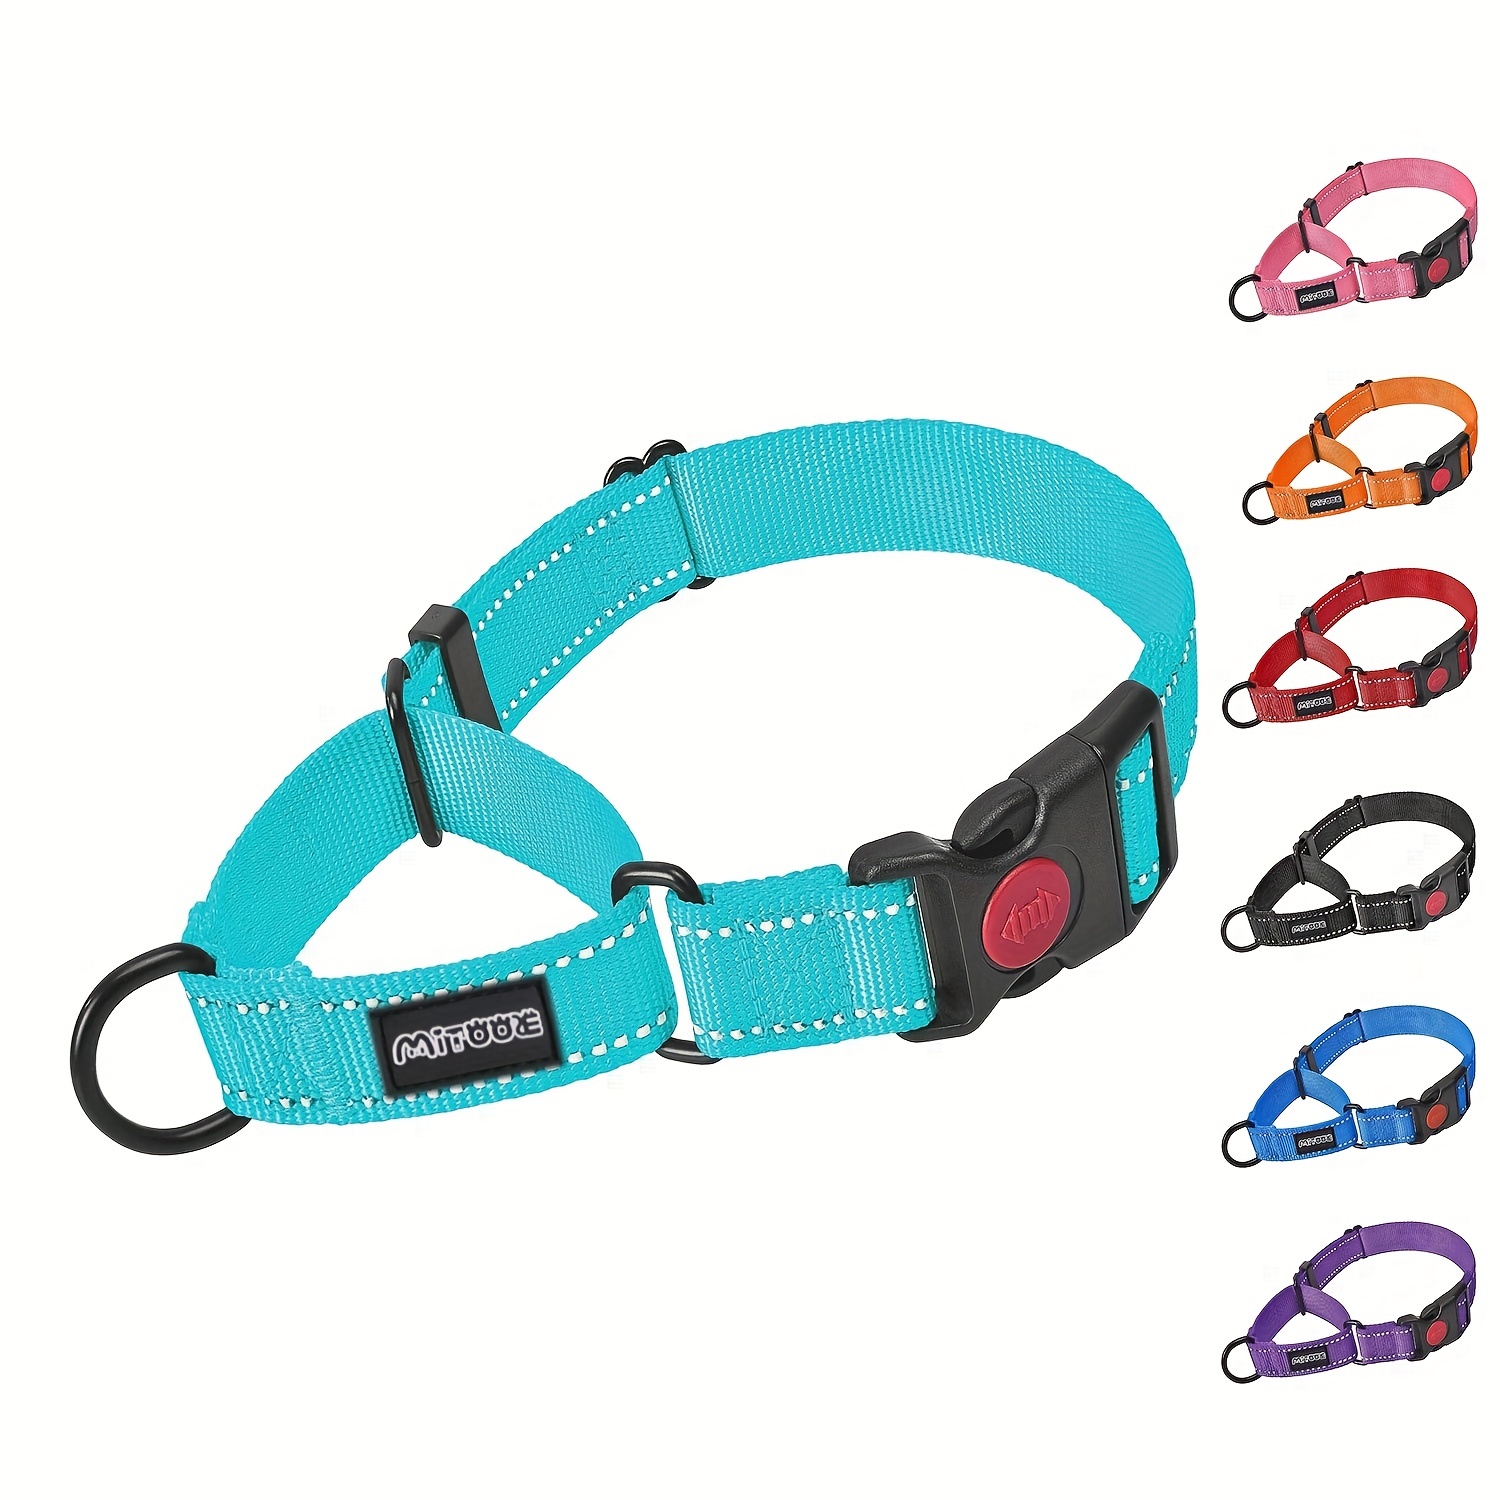 Reflective Dog Collar with Buckle Adjustable Safety Nylon Collars for Small  Medium Large Dogs, Pink M